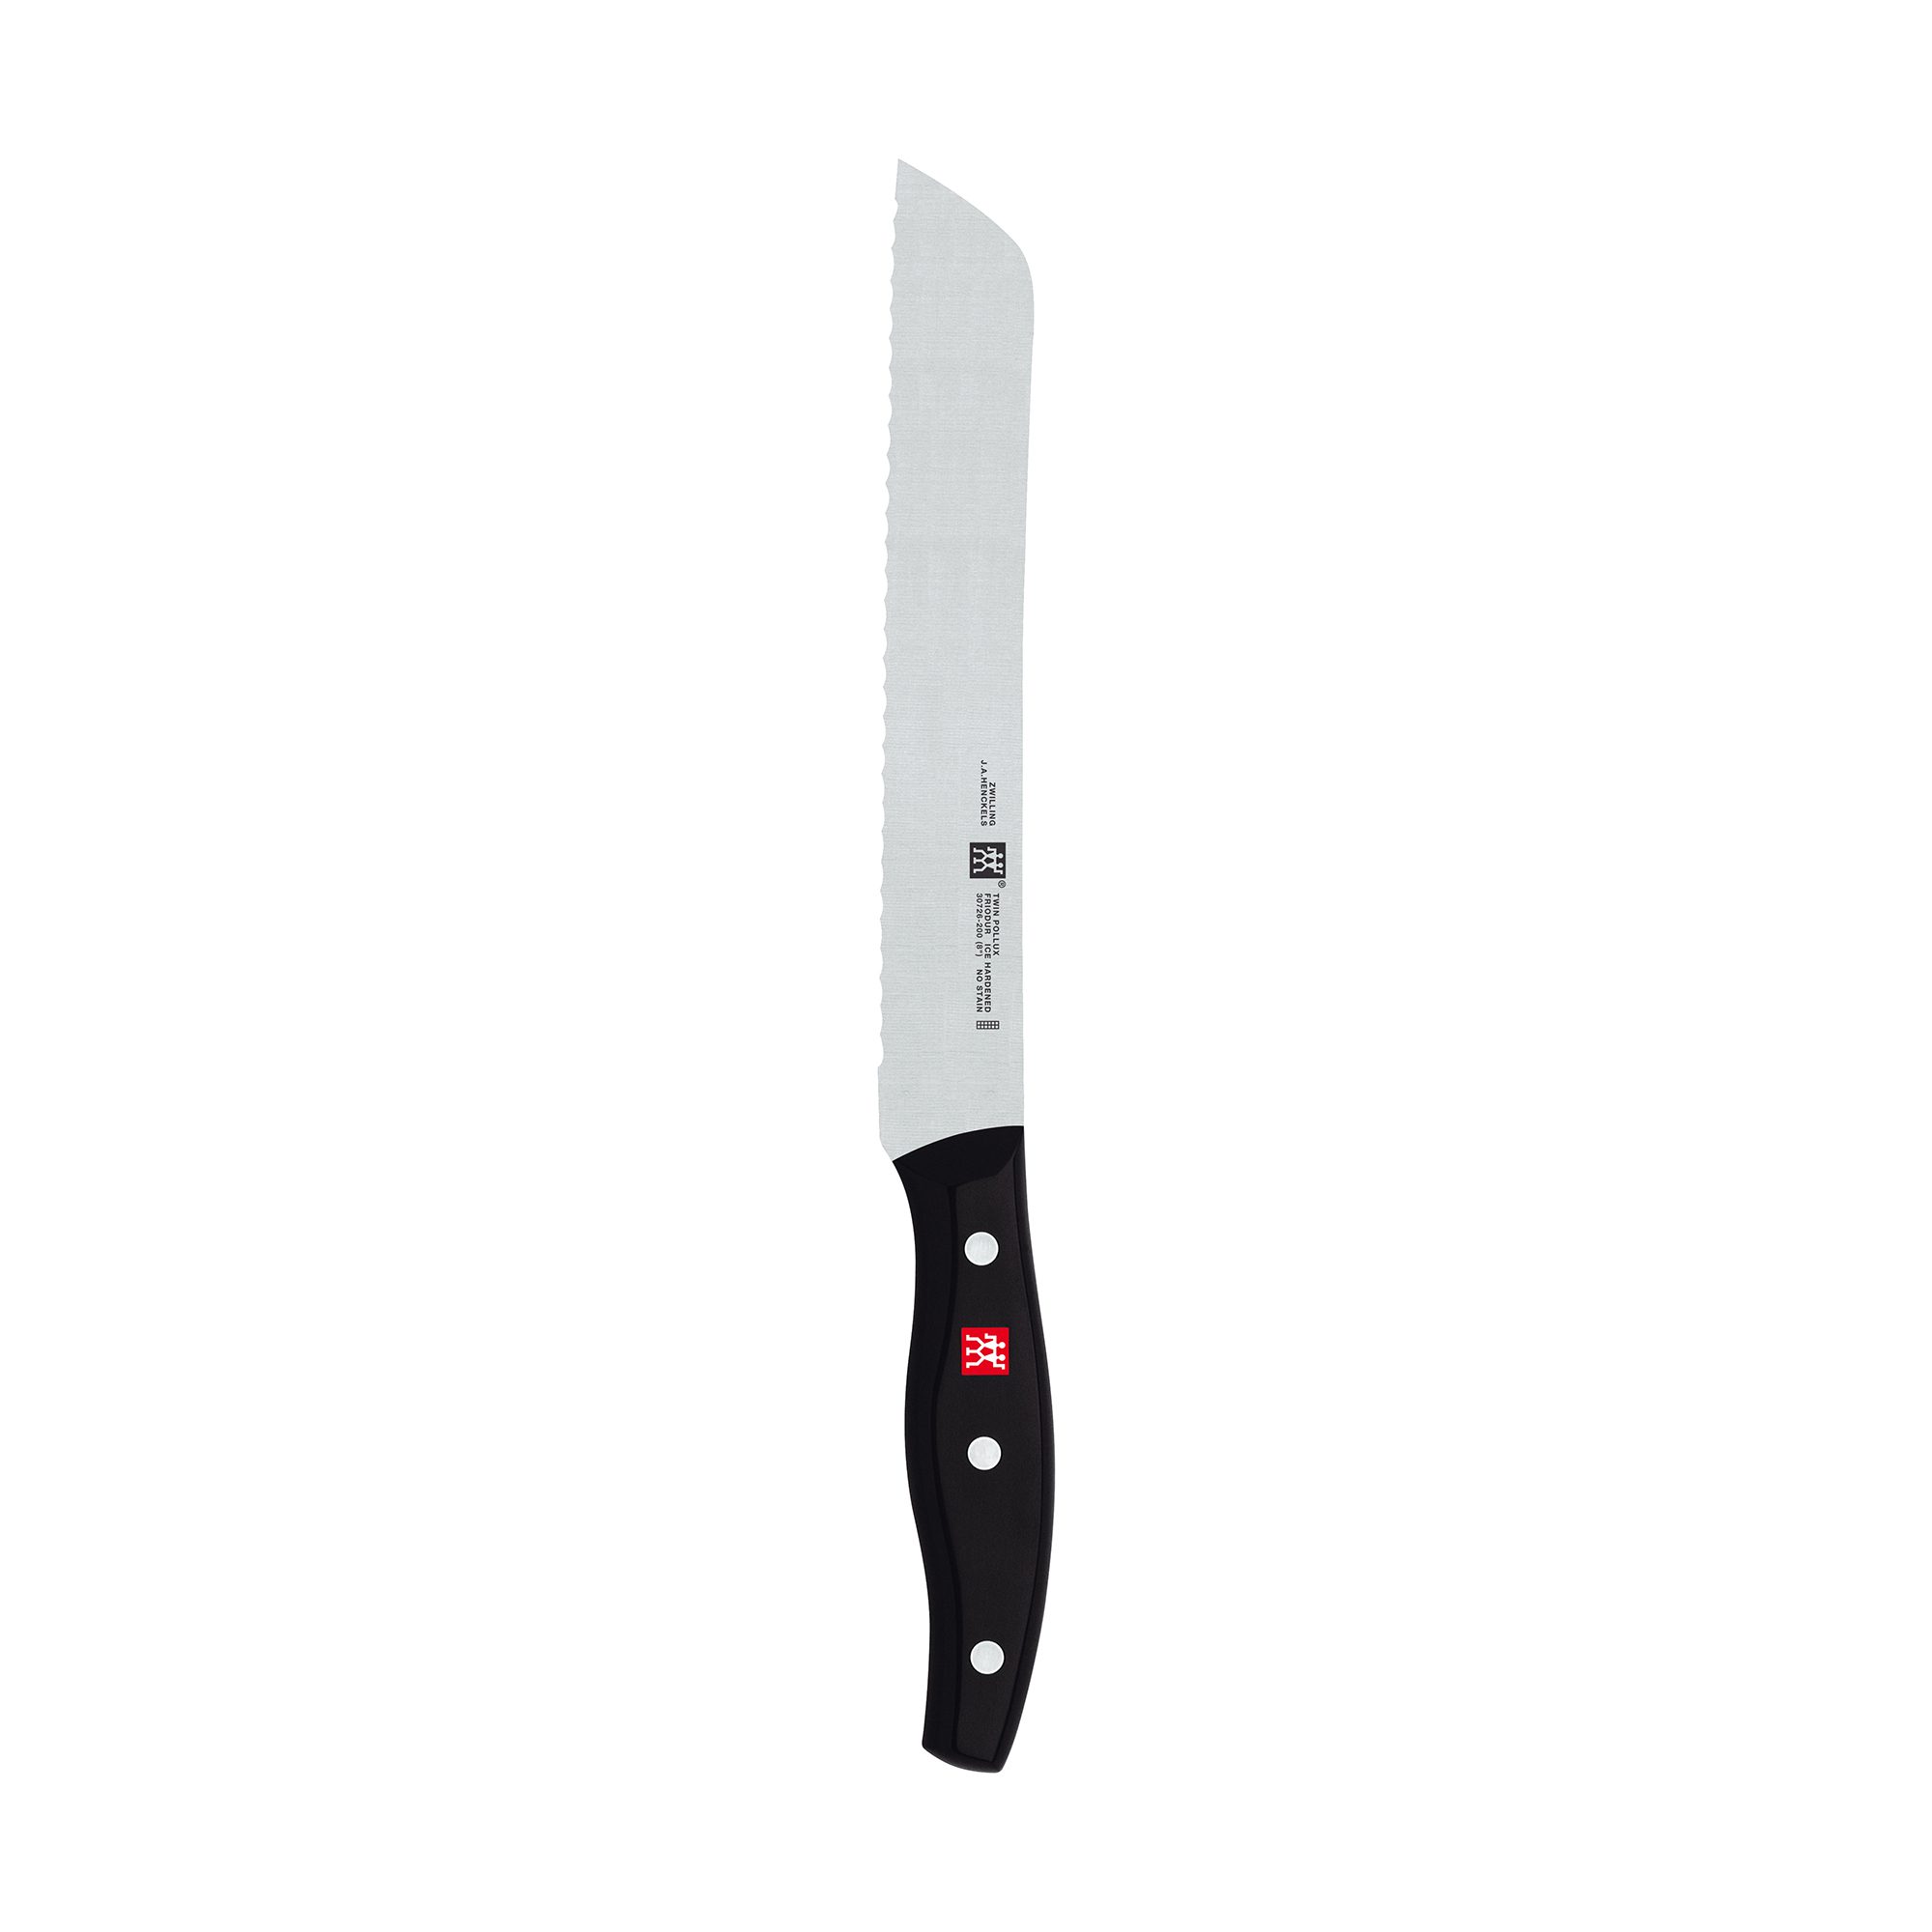 ZWILLING TWIN Signature 8-inch Bread Knife